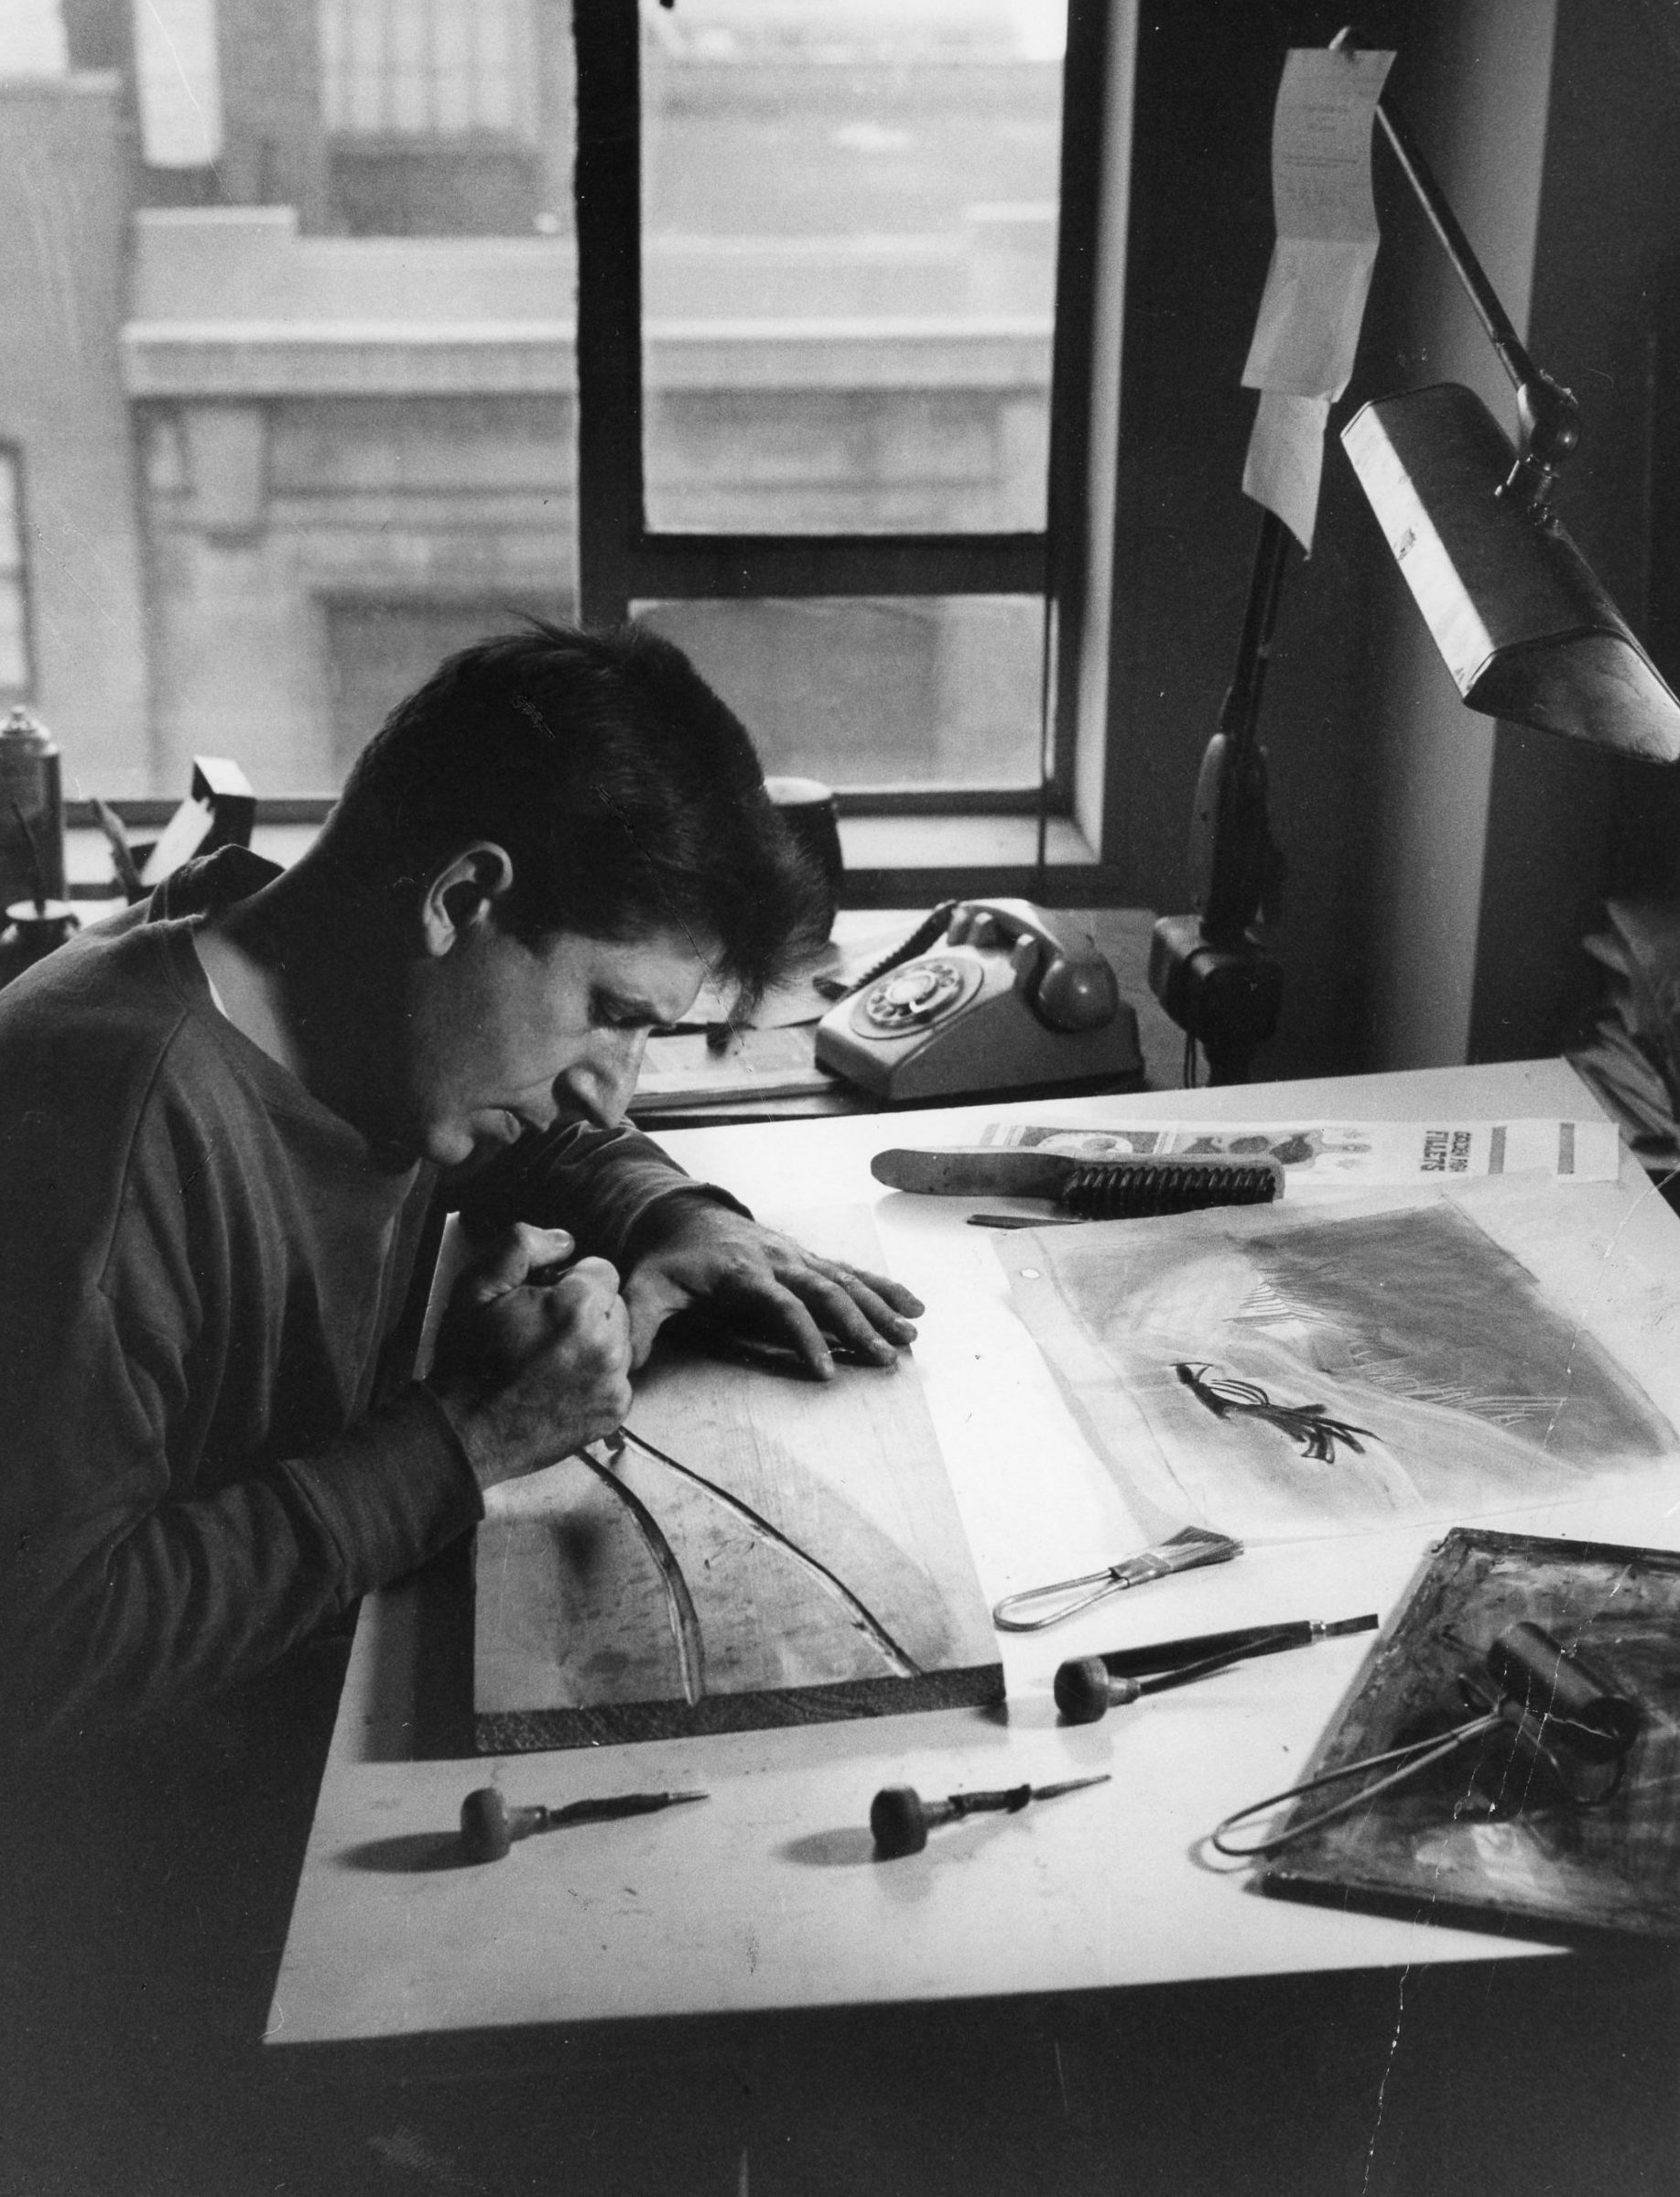 Black and white photo of Walter Ferro in his studio carving a second of two curving lines into a block of wood atop a drafting table with rotary phone and window with brick buildings in the background